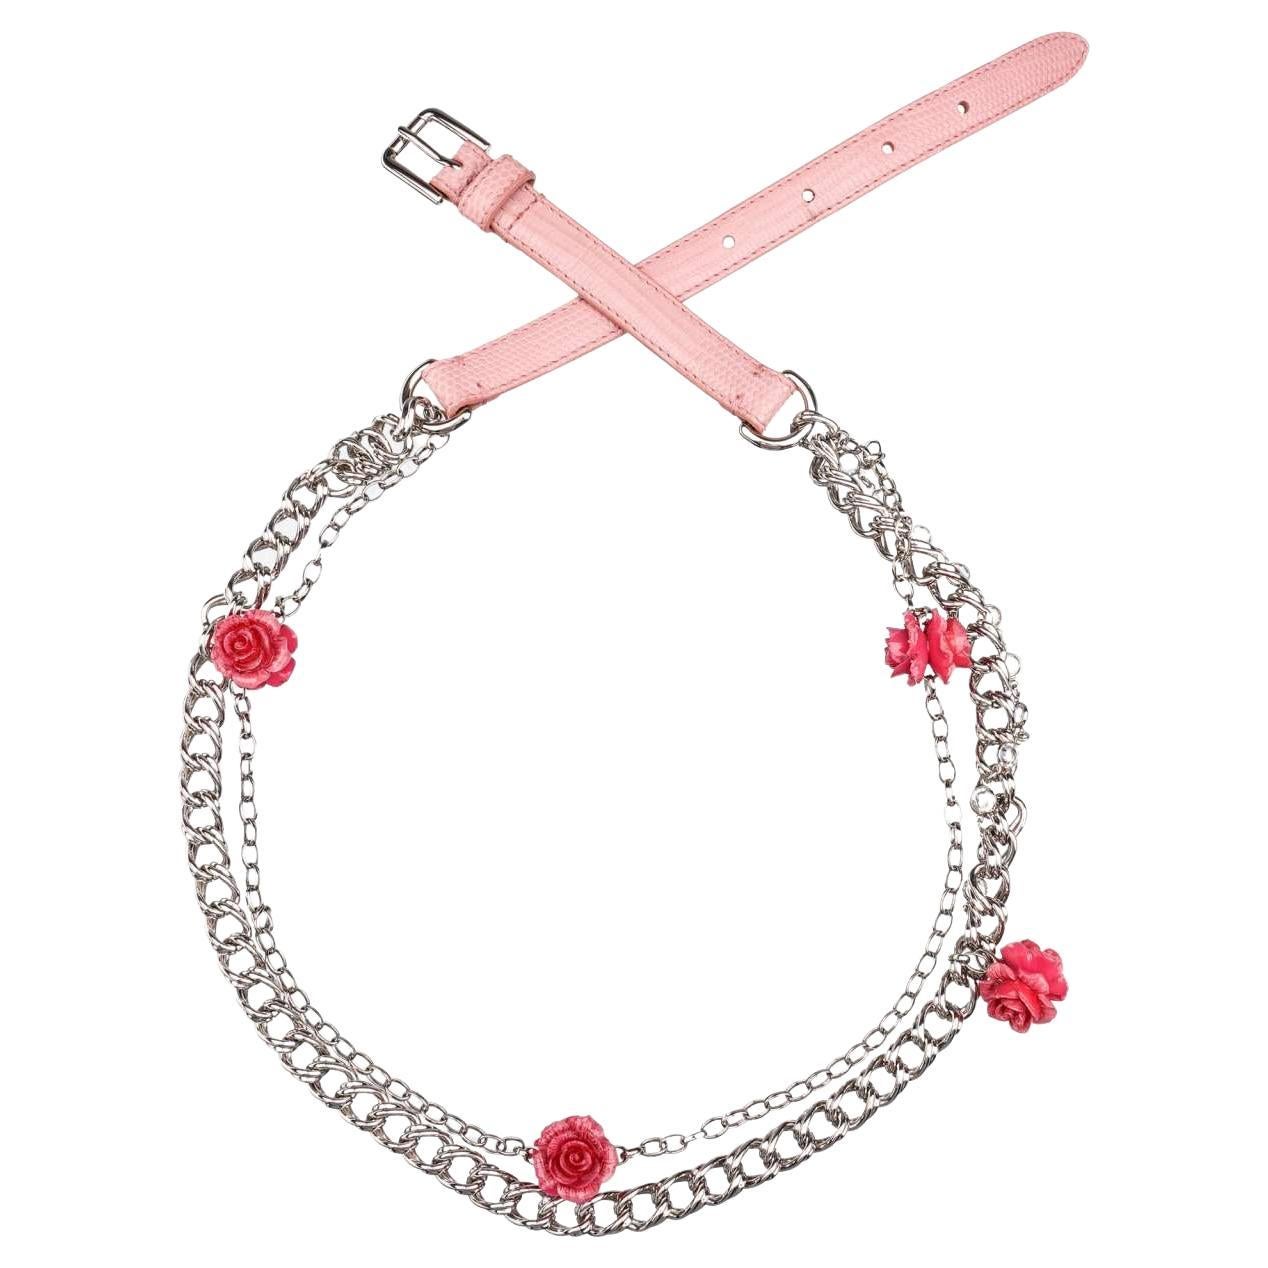 D&G Rose Roses Crystal Lizzard Structure Leather Chain Belt Pink Silver L For Sale